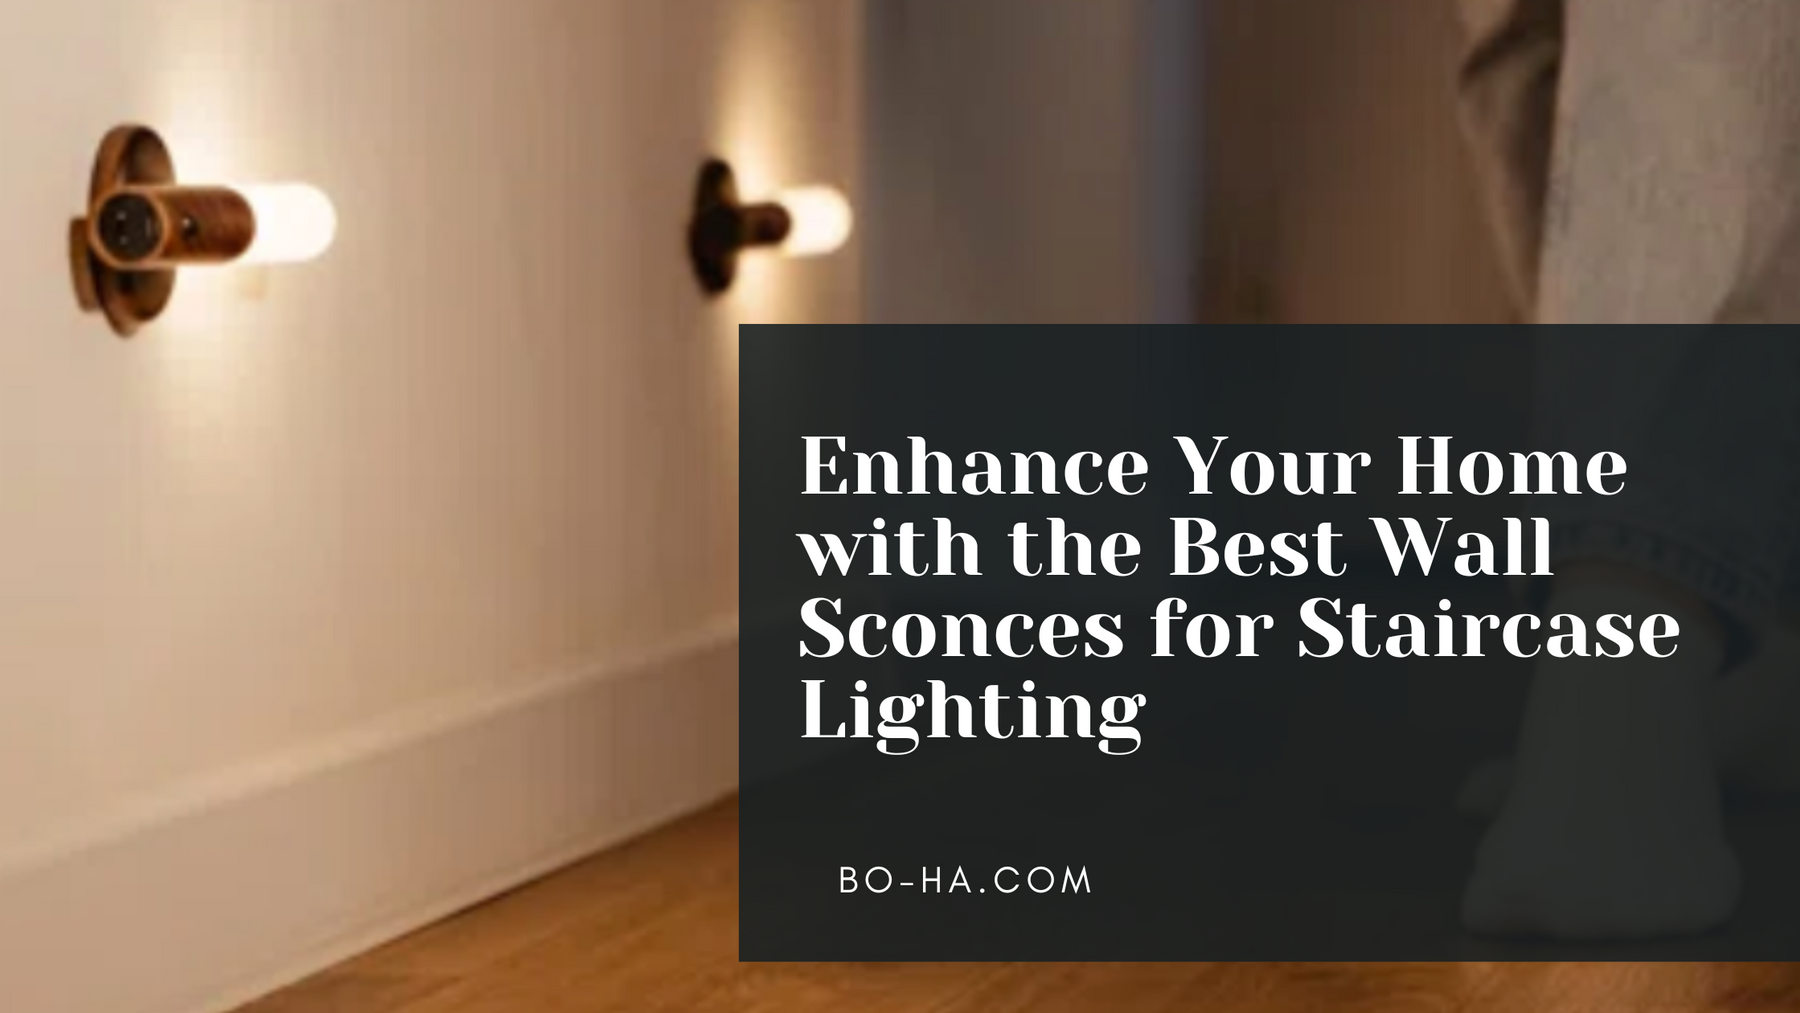 Enhance Your Home with the Best Wall Sconces for Staircase Lighting: Our Top Picks